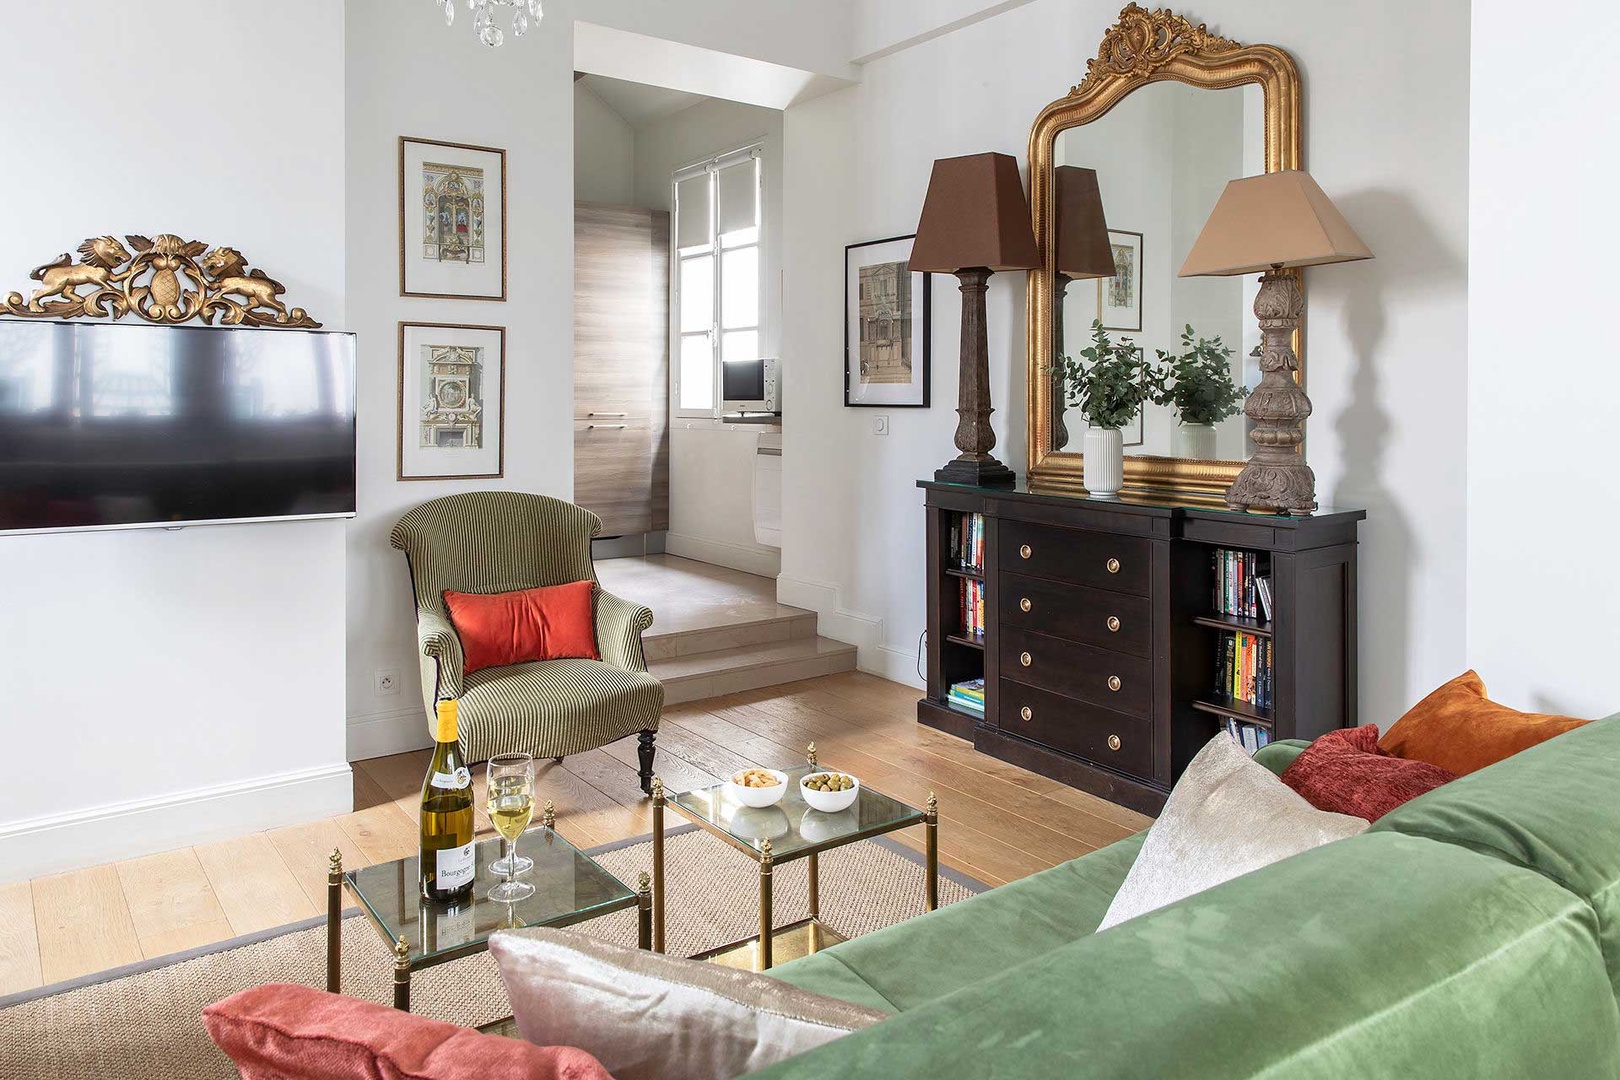 The apartment offers a peaceful and relaxing stay right in the center of Paris.